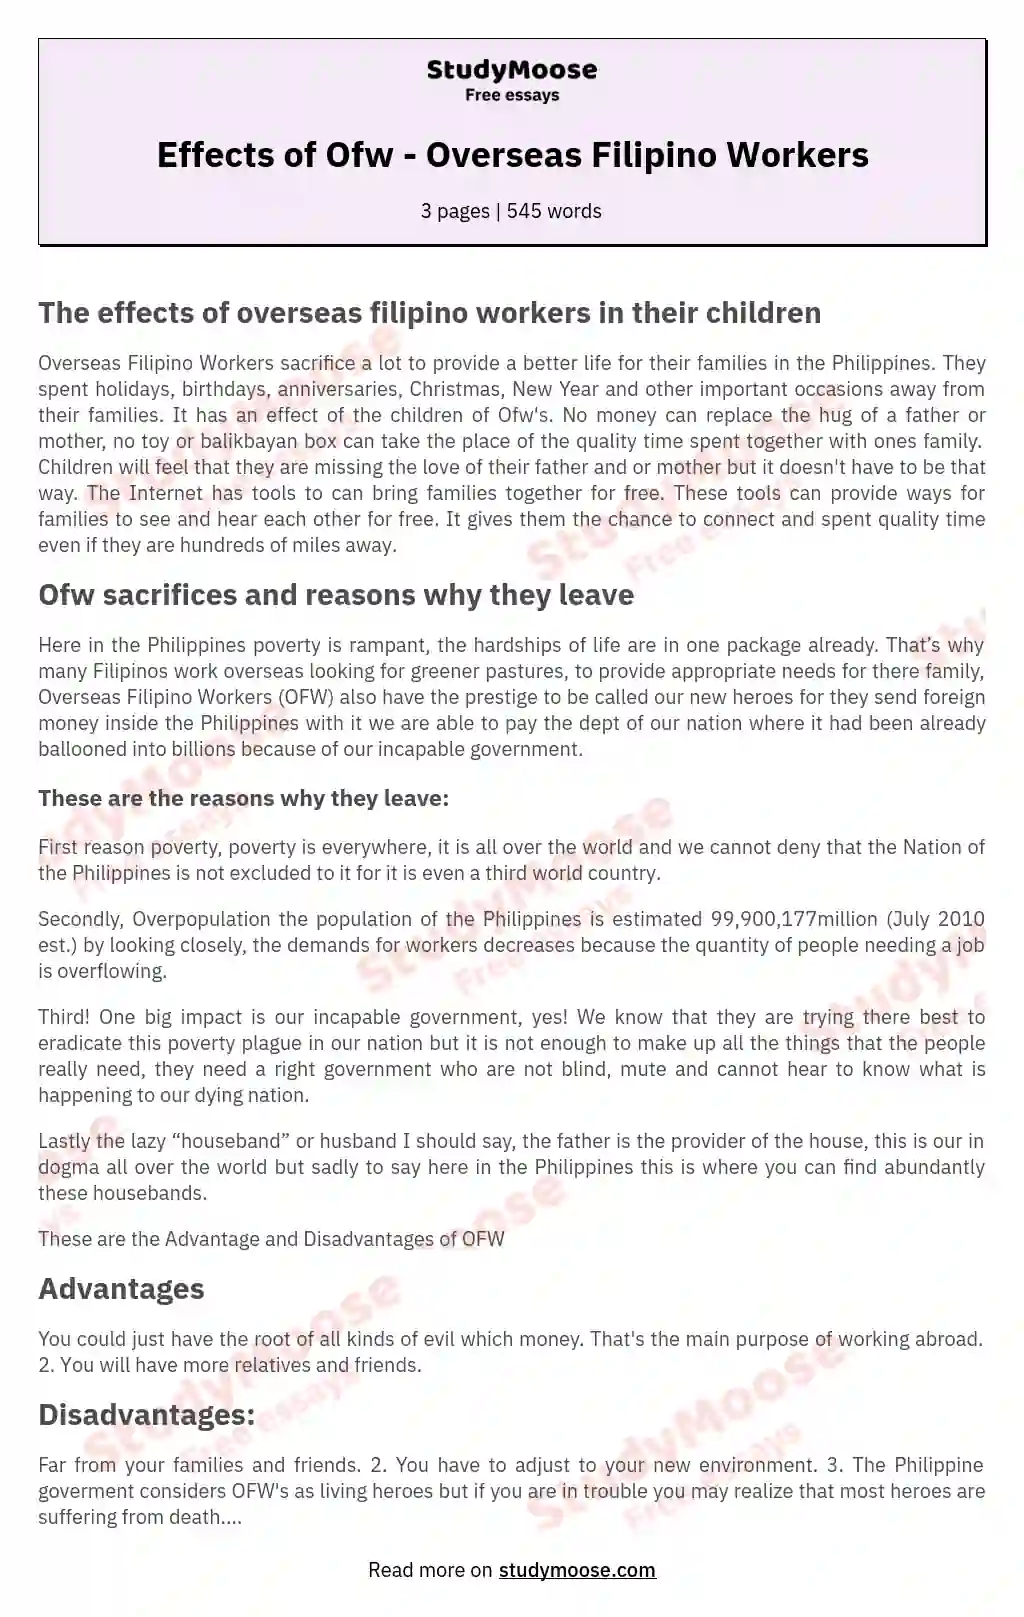 Effects of Ofw - Overseas Filipino Workers essay